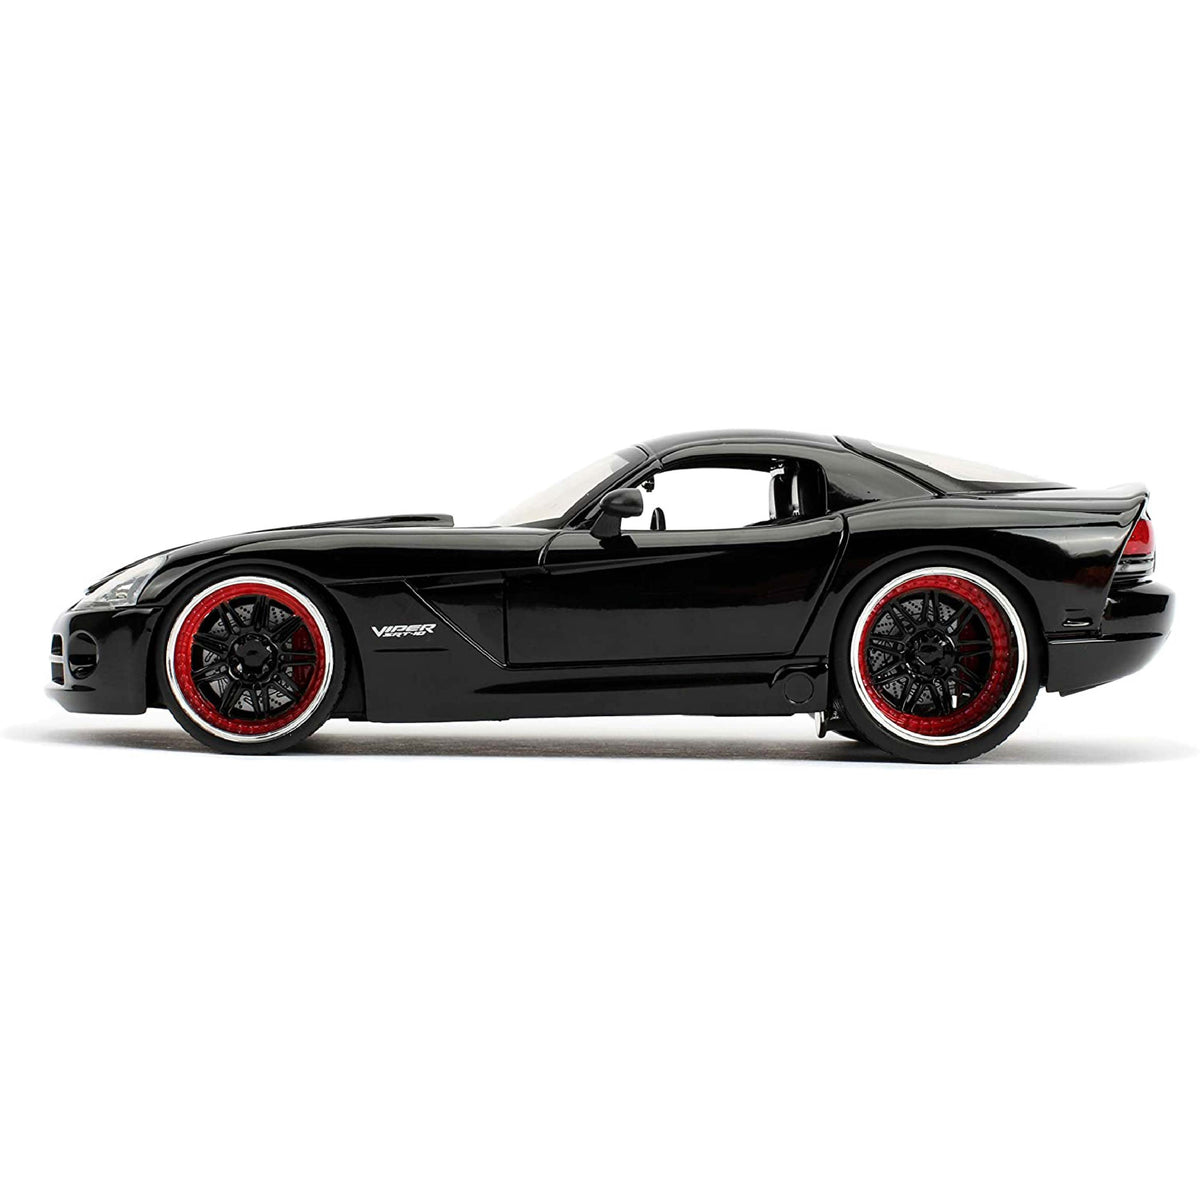 Jada Toys 30731 Lettys Dodge Viper SRT 10 Fast & Furious Movie 1 by 24 Diecast M for sale online 